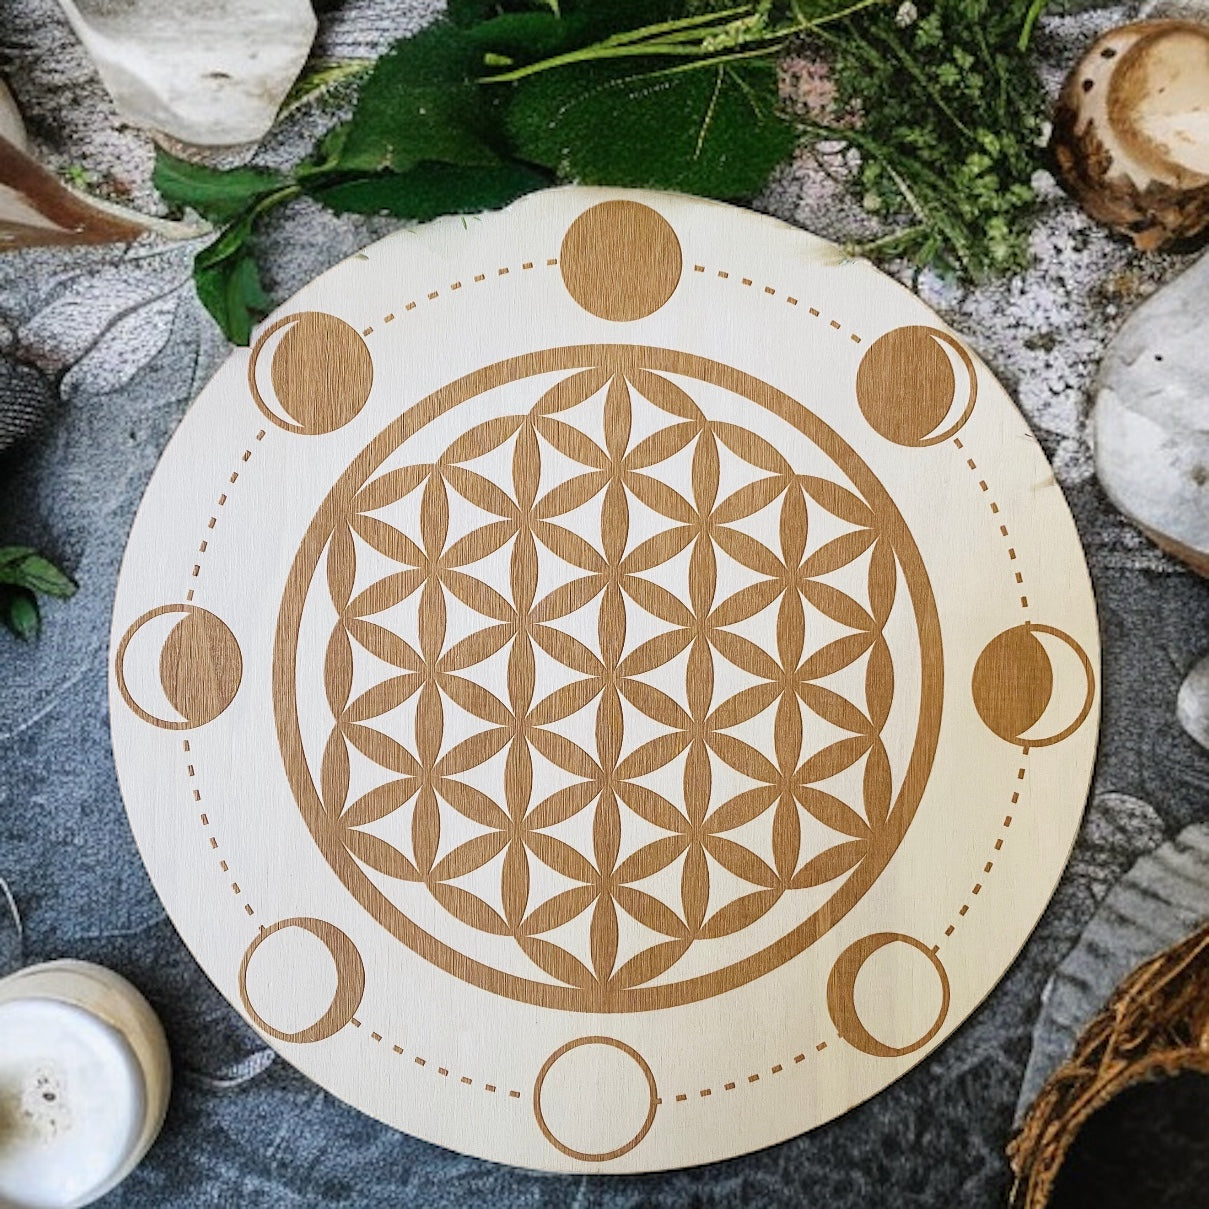 CRYSTAL GRIDS || FLOWER OF LIFE BOARD